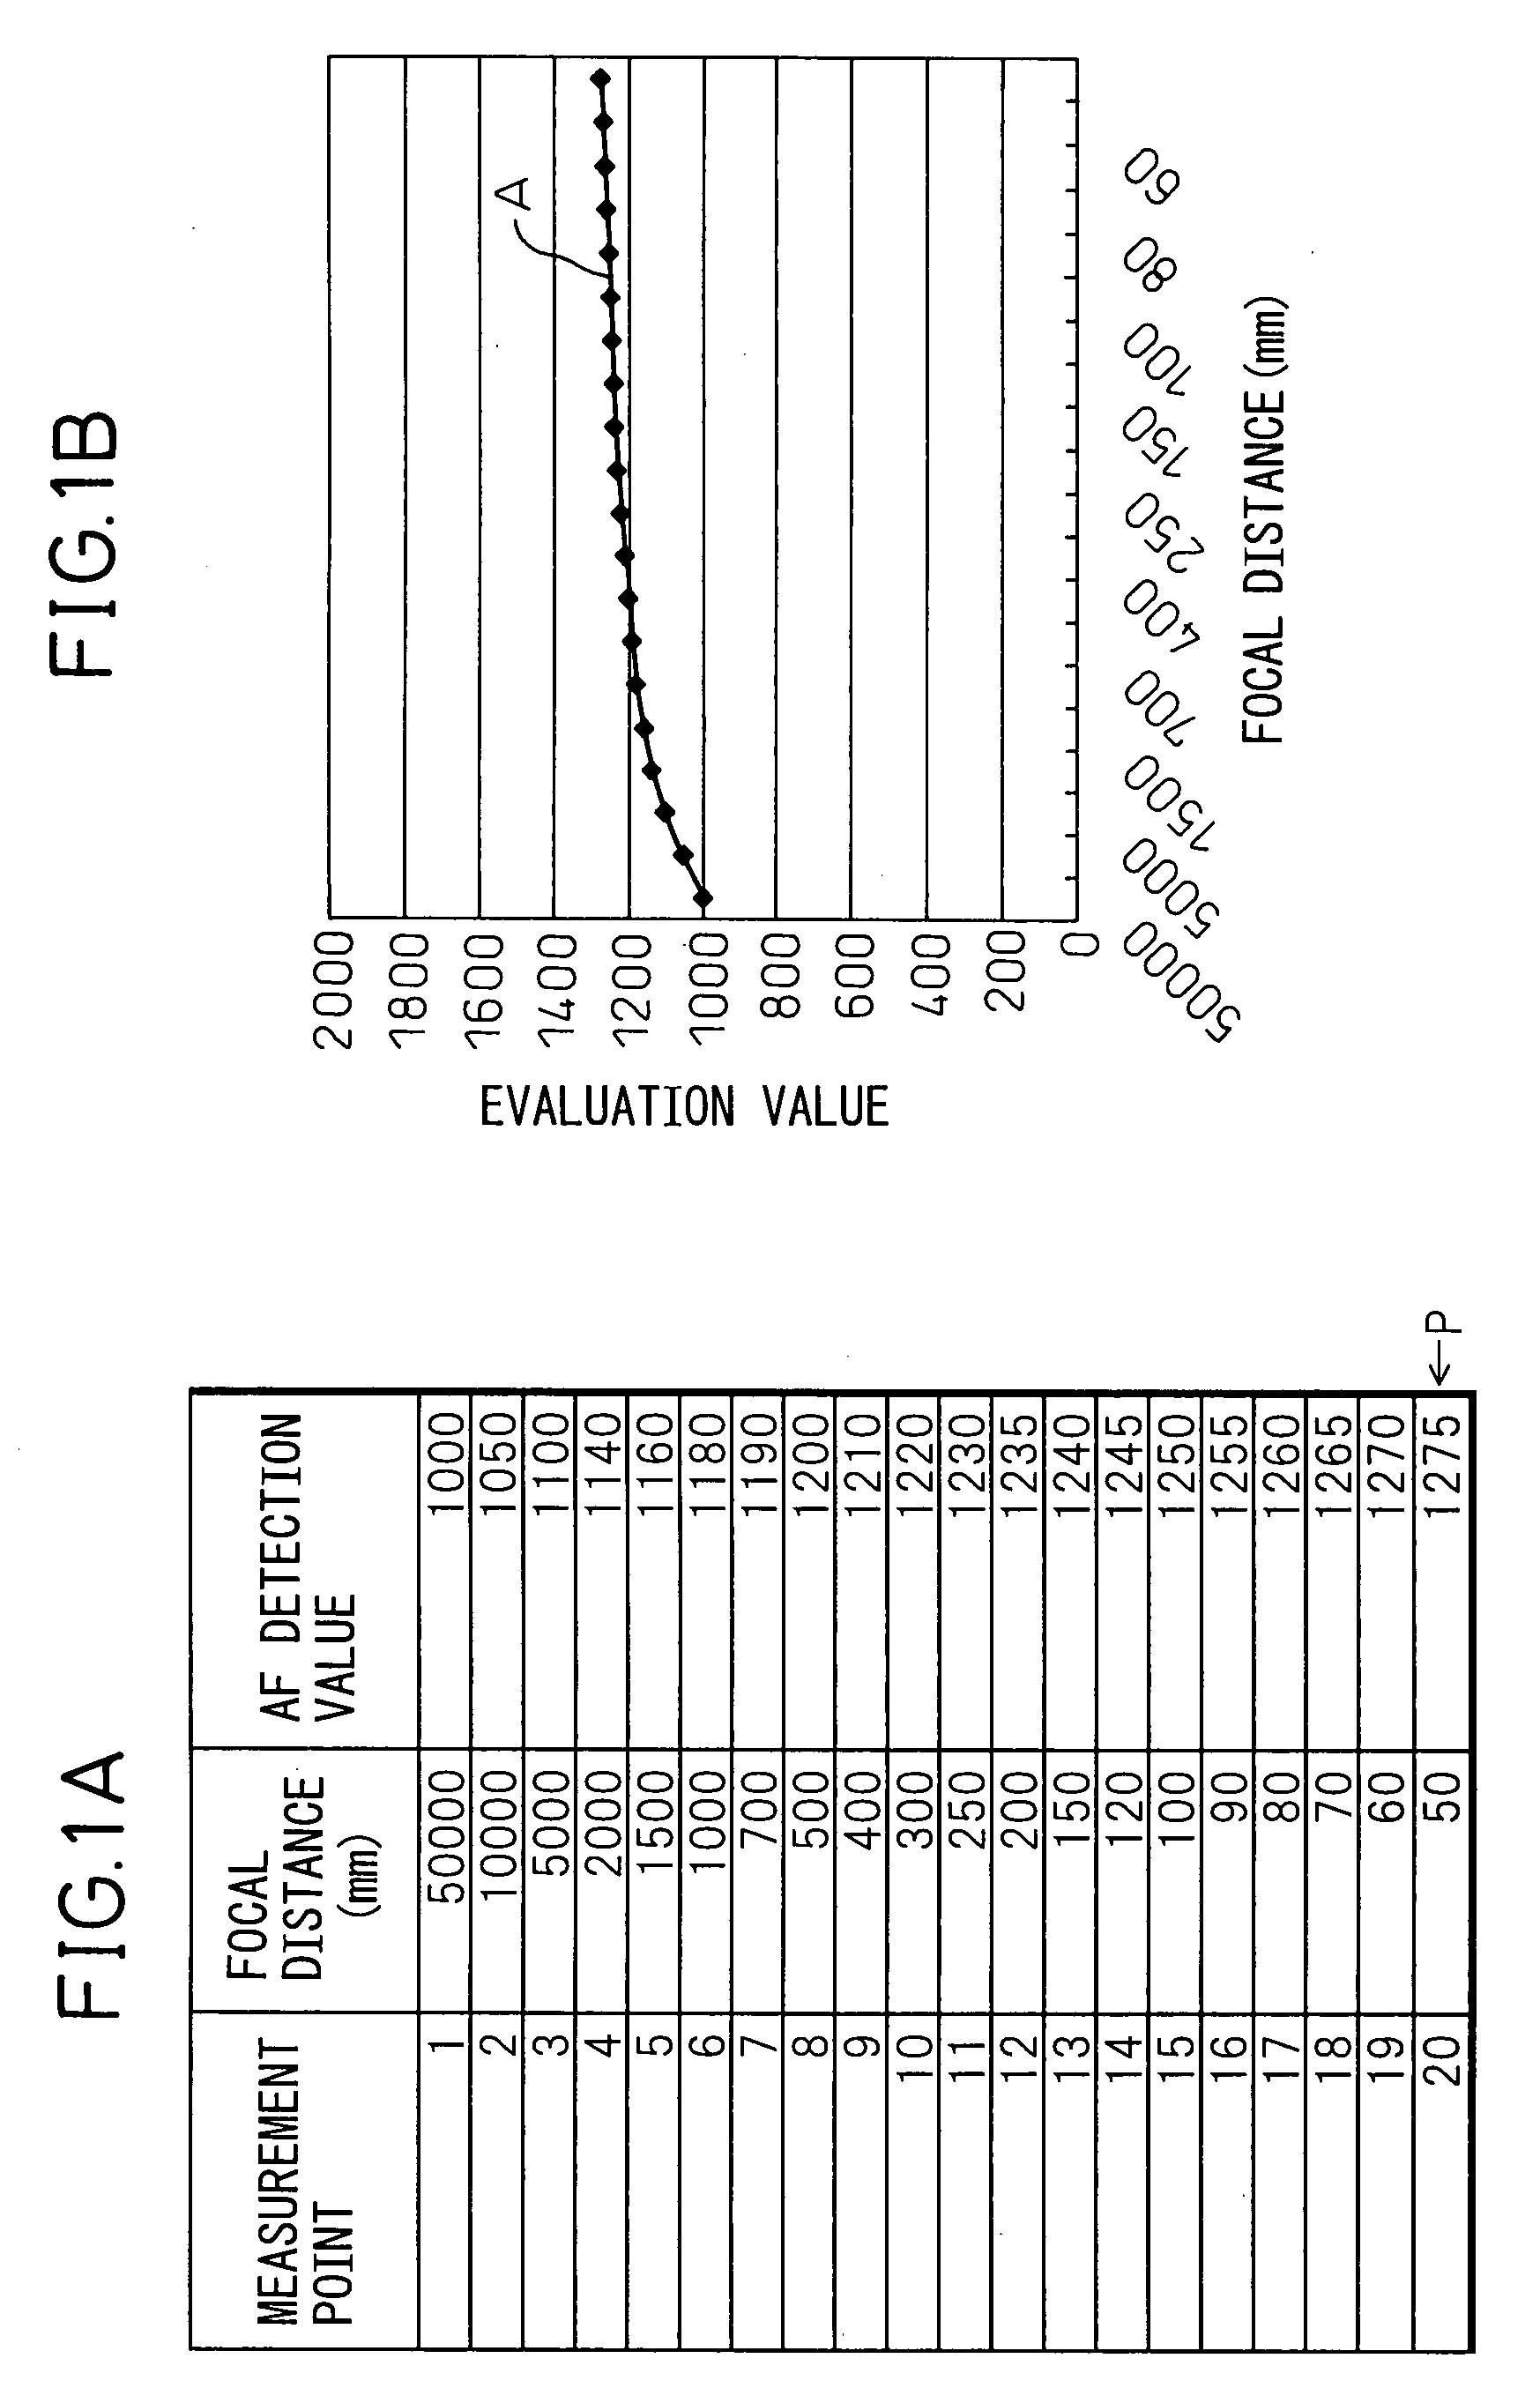 Imaging apparatus with AF optical zoom